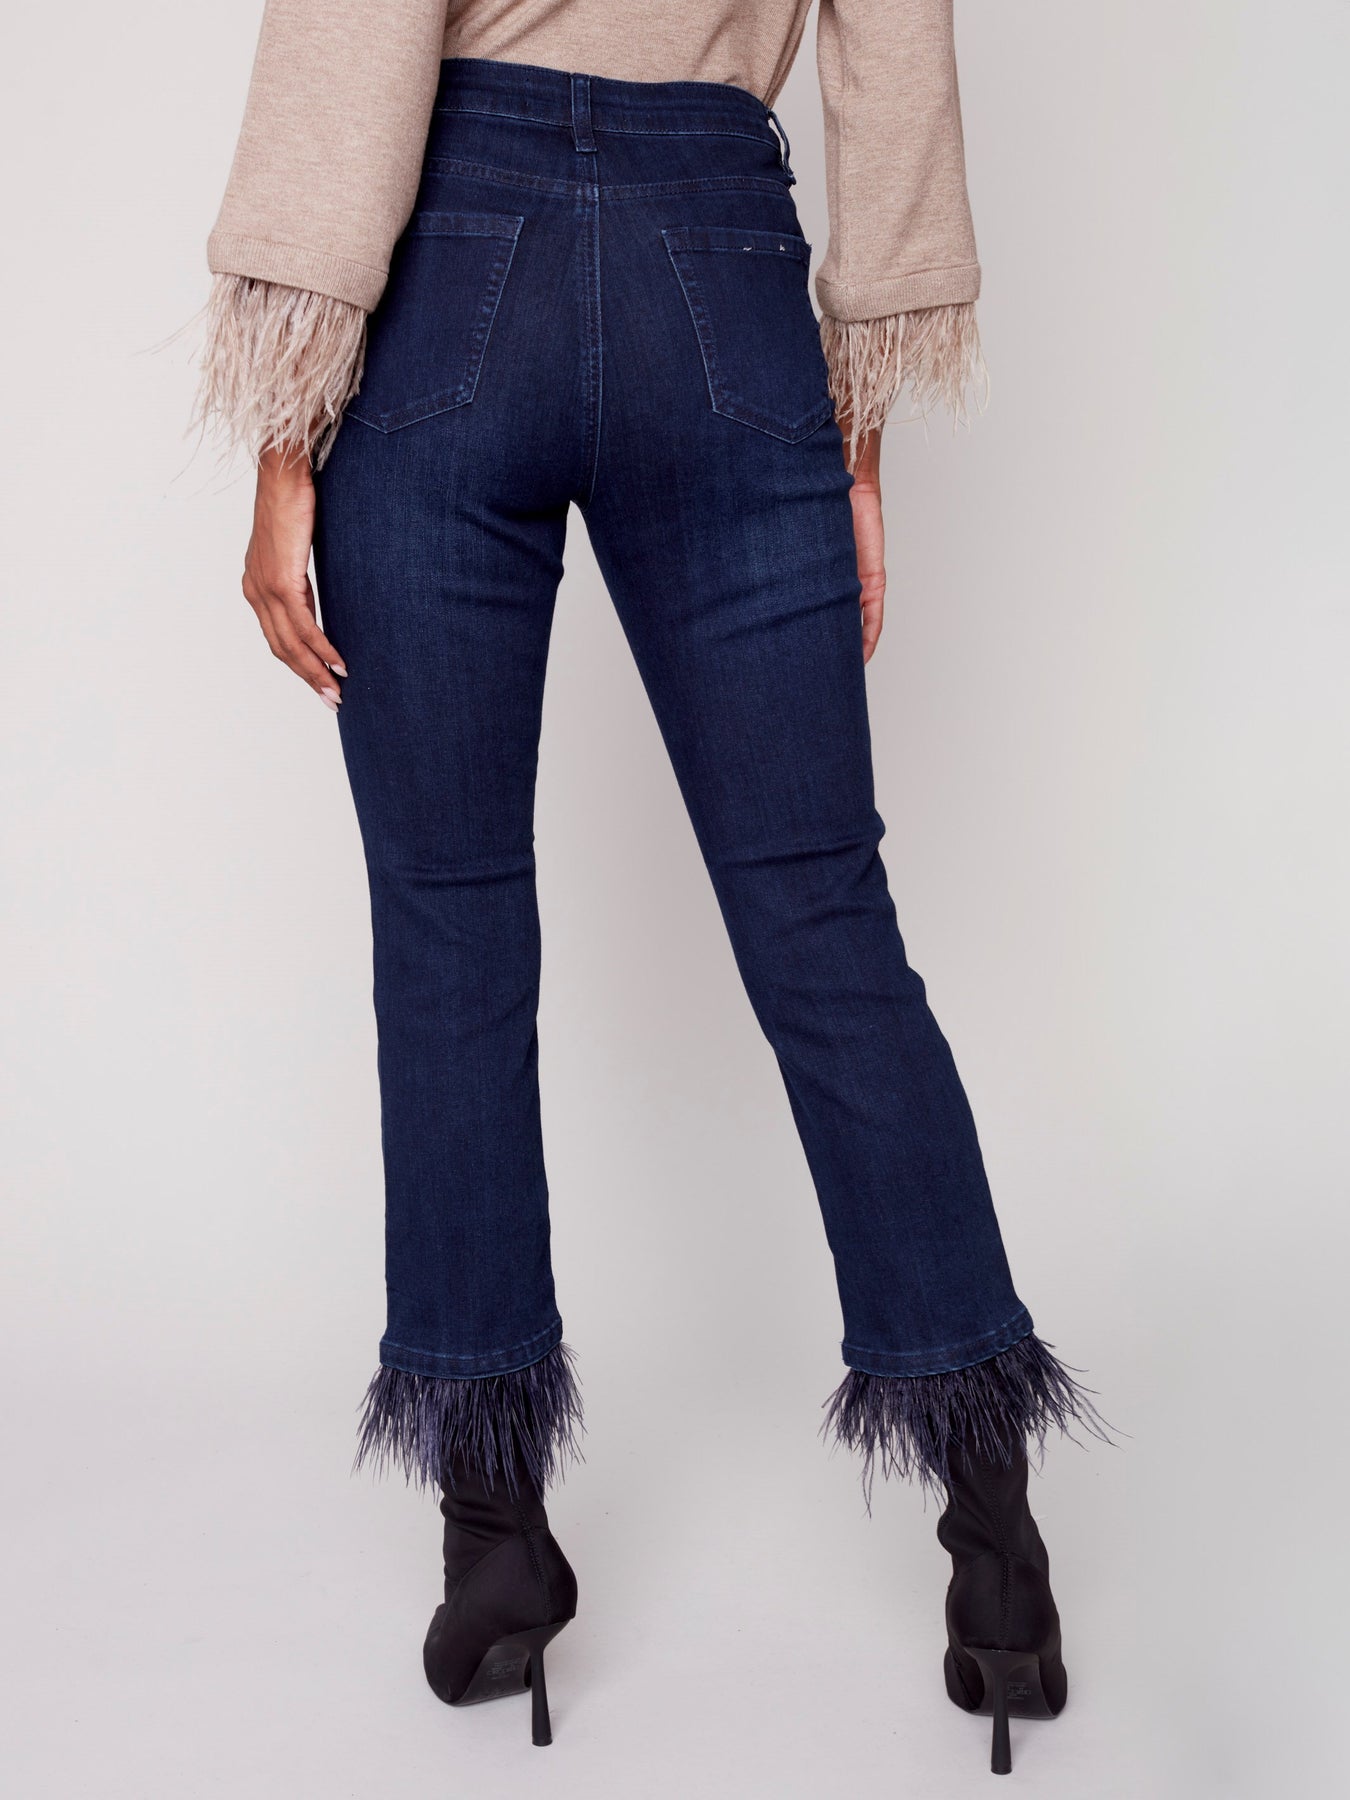 Lisa Maree Float The Boat Denim Feather Trim Jeans in Black Xs / Black